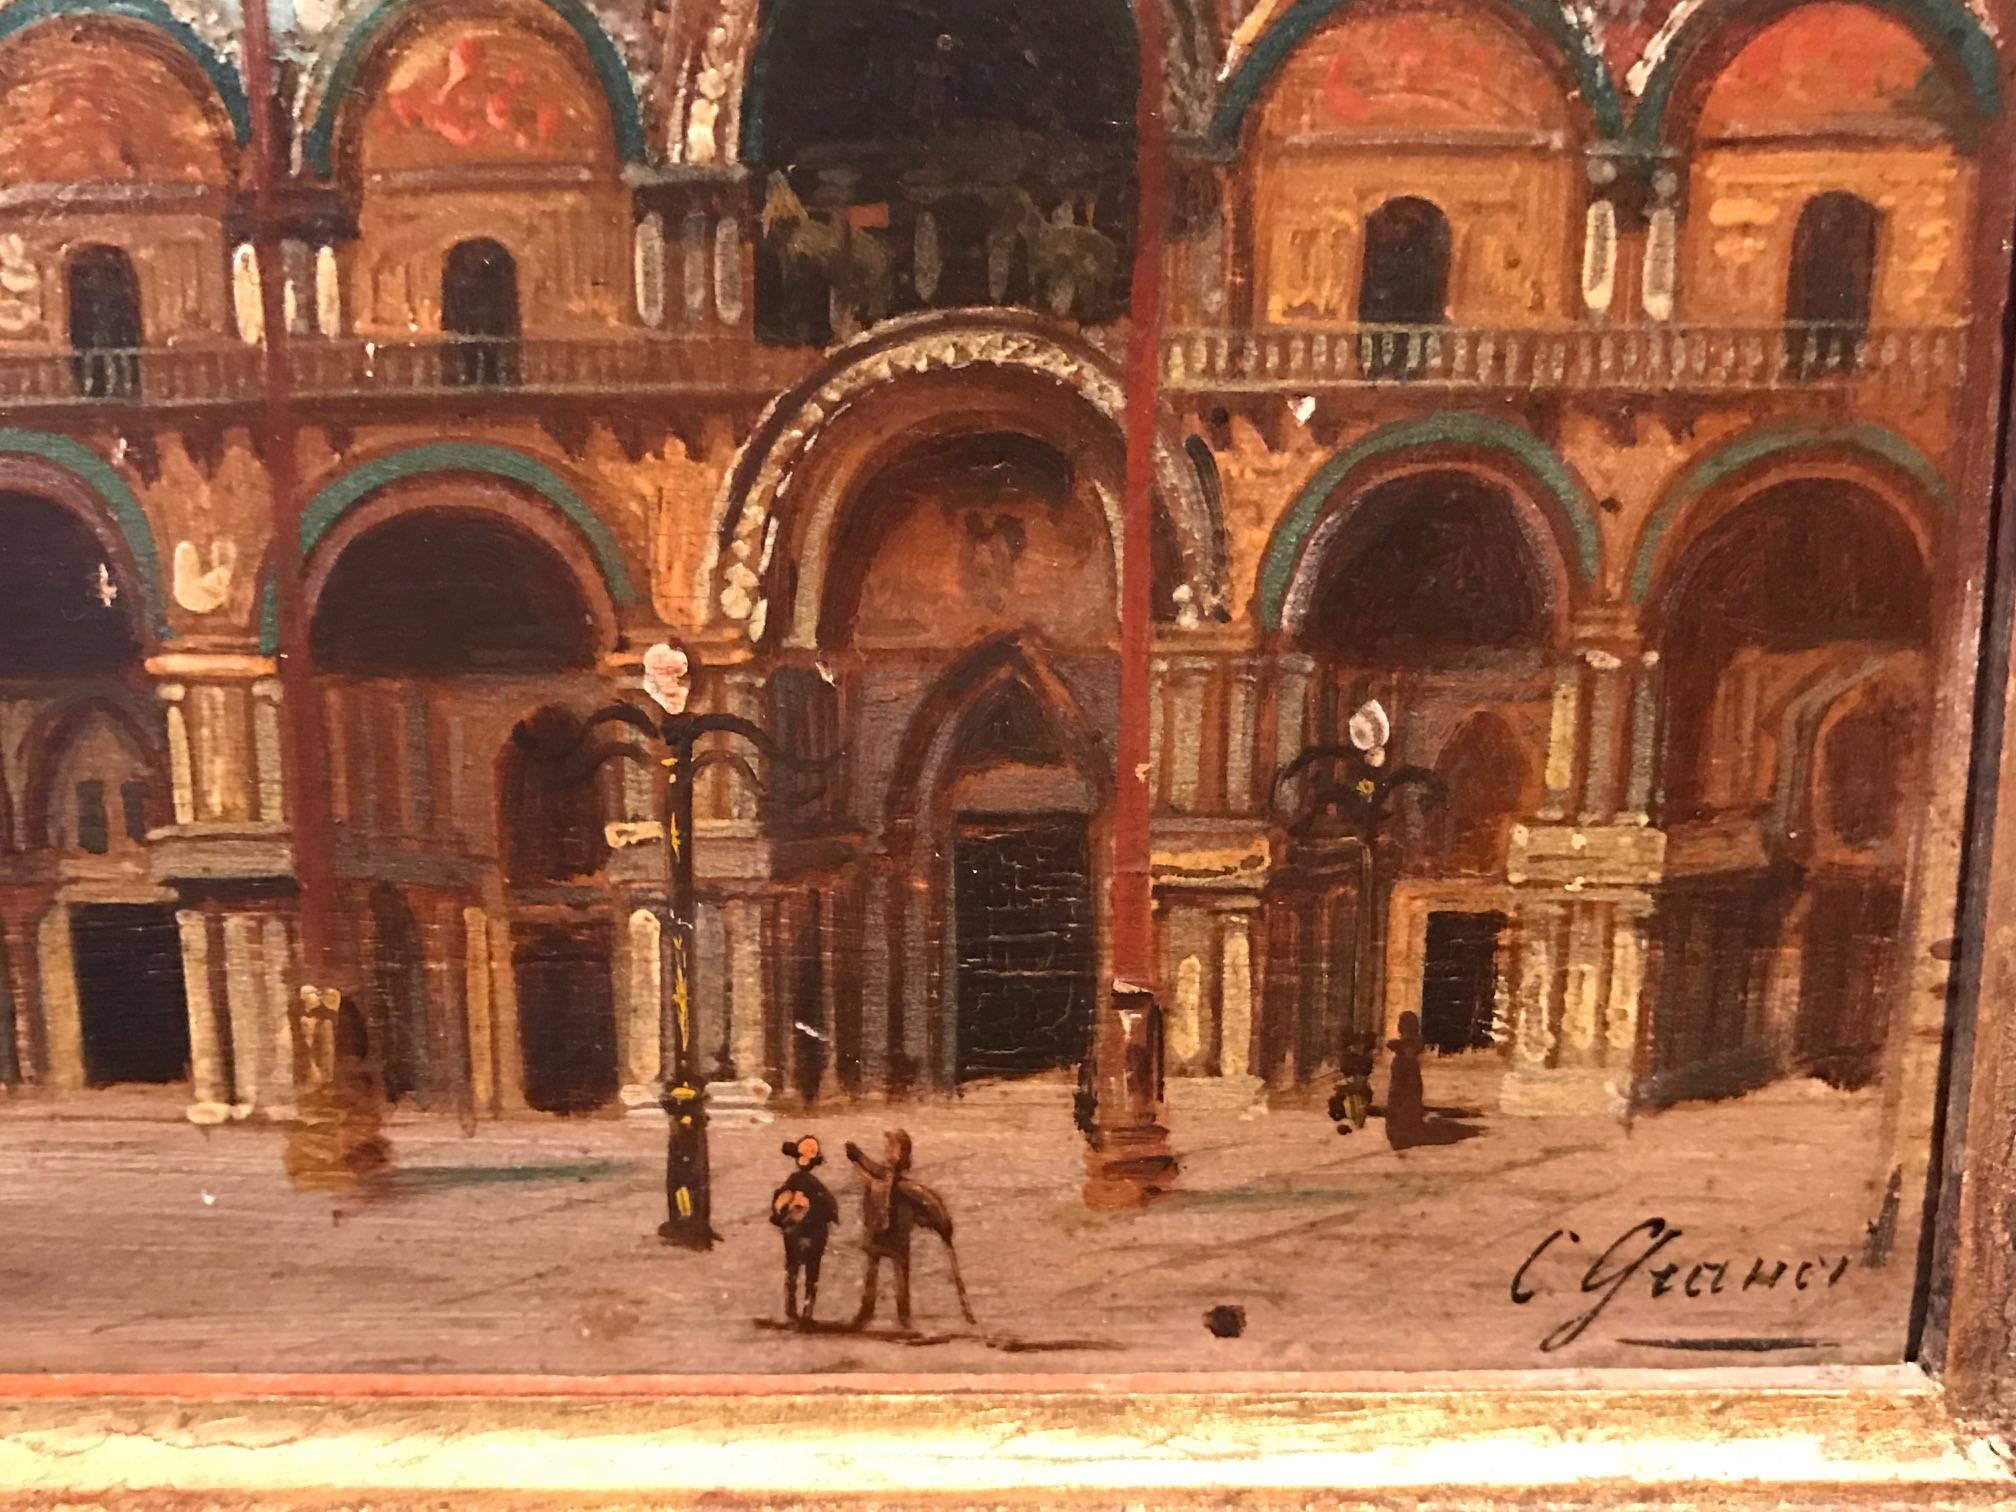 Fine 19th century Italian oil painting on wood panel, depicting this legendary and famous view of Piazza San Marco in Venice and the Basilica of St. Mark. 

The work is signed by its Italian artist to the lower right corner - and also titled verso